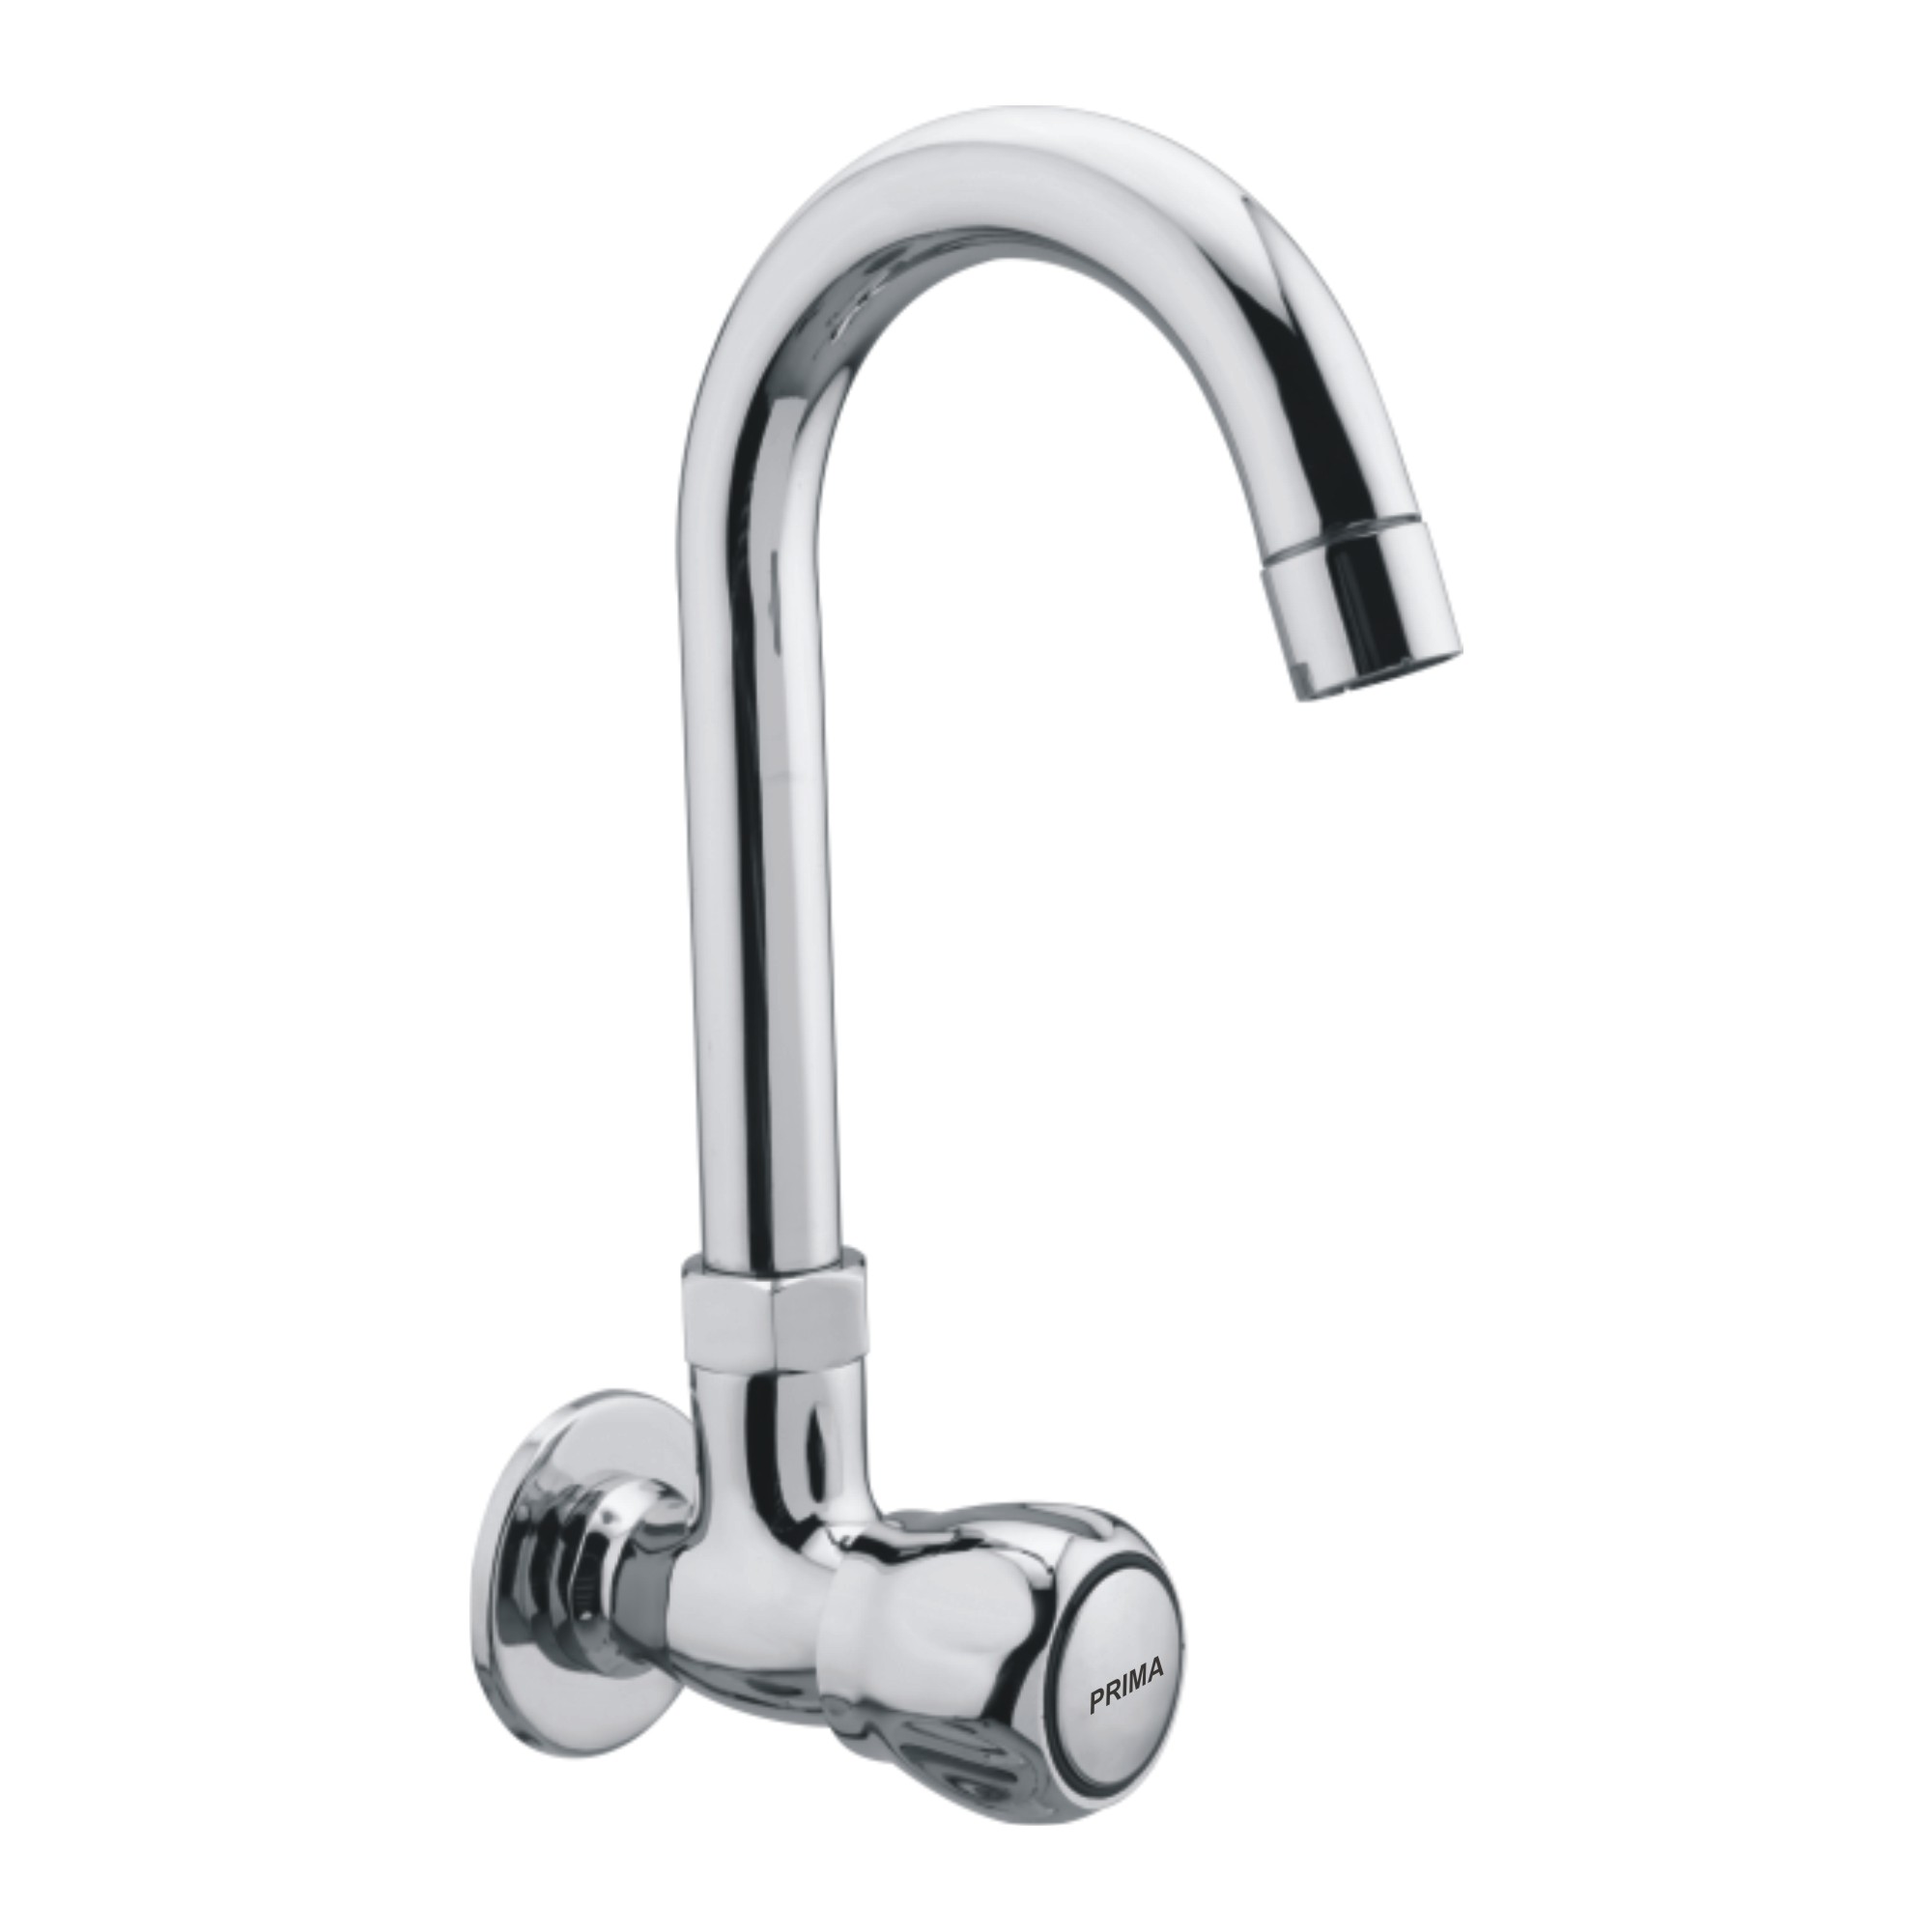 C.P Sink Cock with Swivel Spout